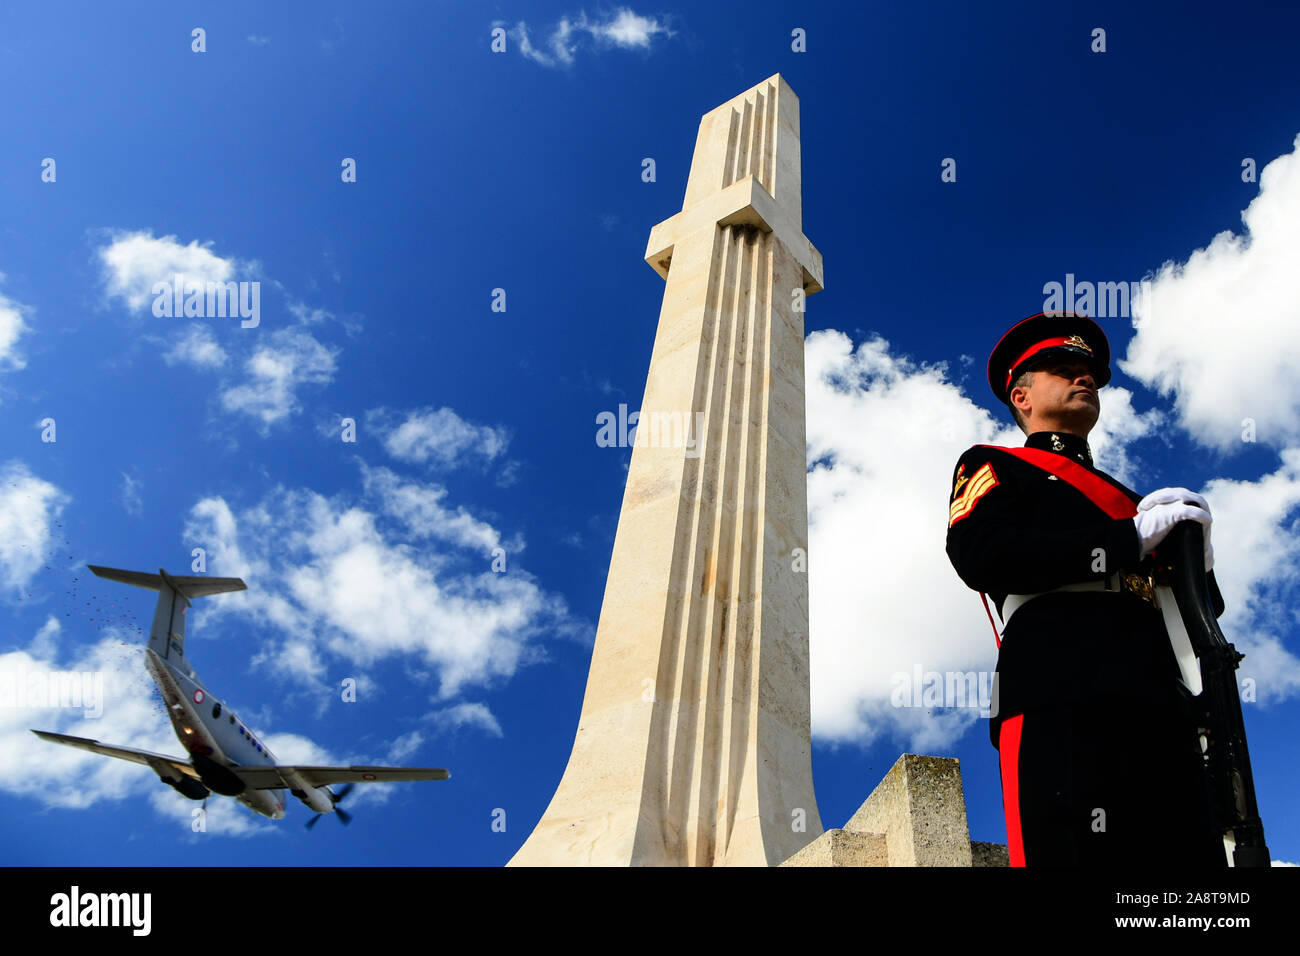 Beijing, Malta. 10th Nov, 2019. A soldier stands guard in front of the War Memorial as a military aircraft flies over in Floriana, Malta, on Nov. 10, 2019. Malta marked Remembrance Day to salute the war dead on Sunday. Credit: Jonathan Borg/Xinhua/Alamy Live News Stock Photo